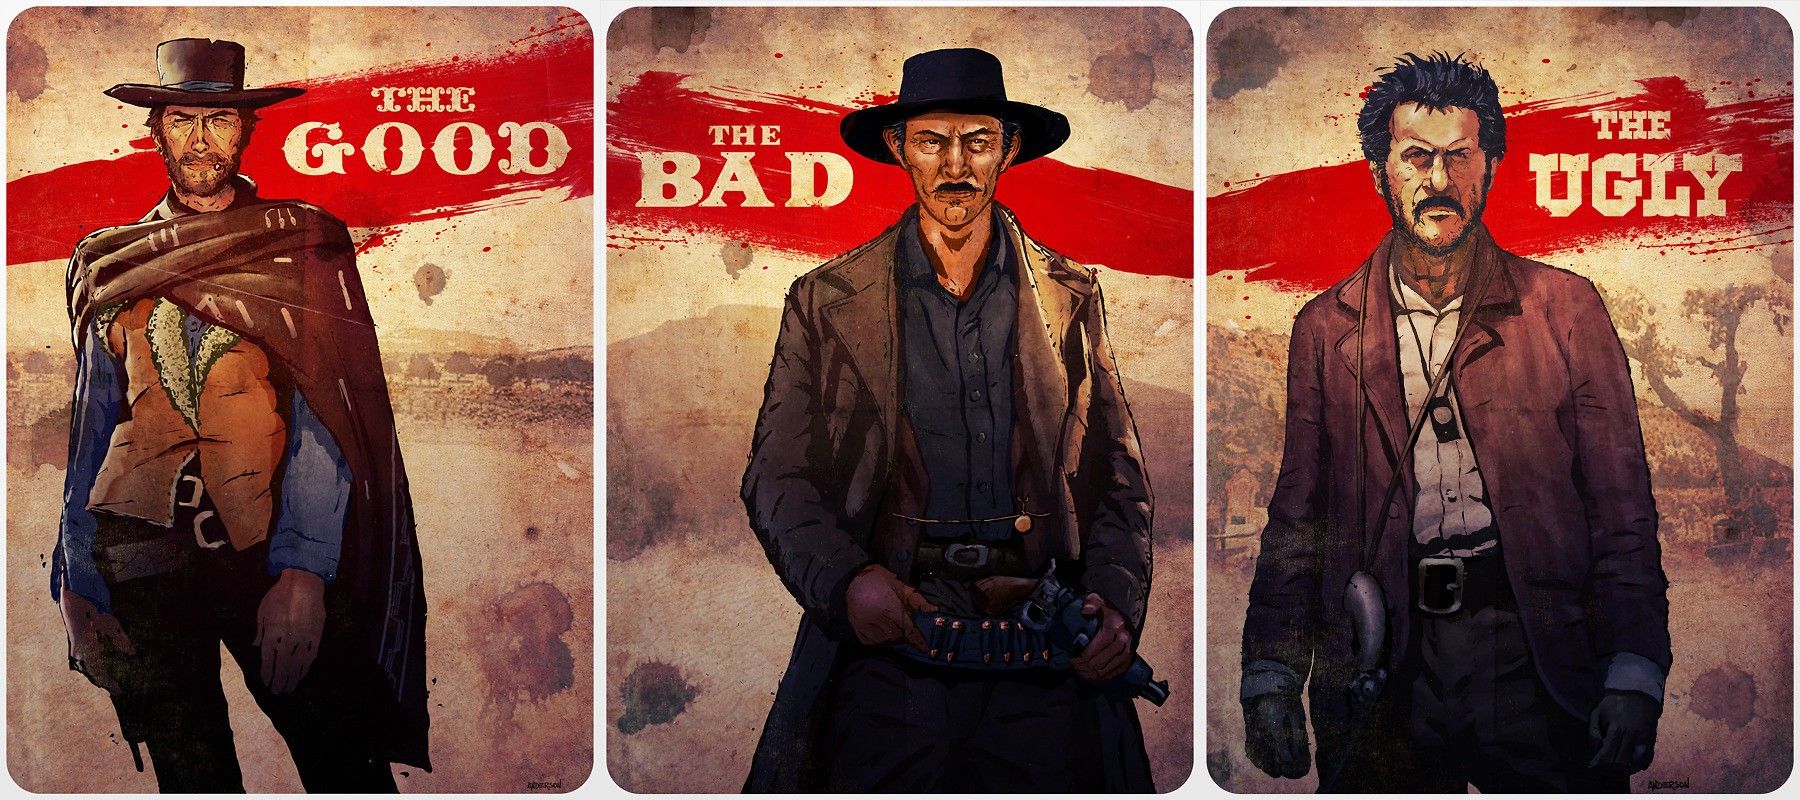 #Clint Eastwood, #Eli Wallach, #western, #Sergio Leone, #Lee Van Cleef, #movies, #The Good, the Bad and the Ugly, #collage, wallpaper